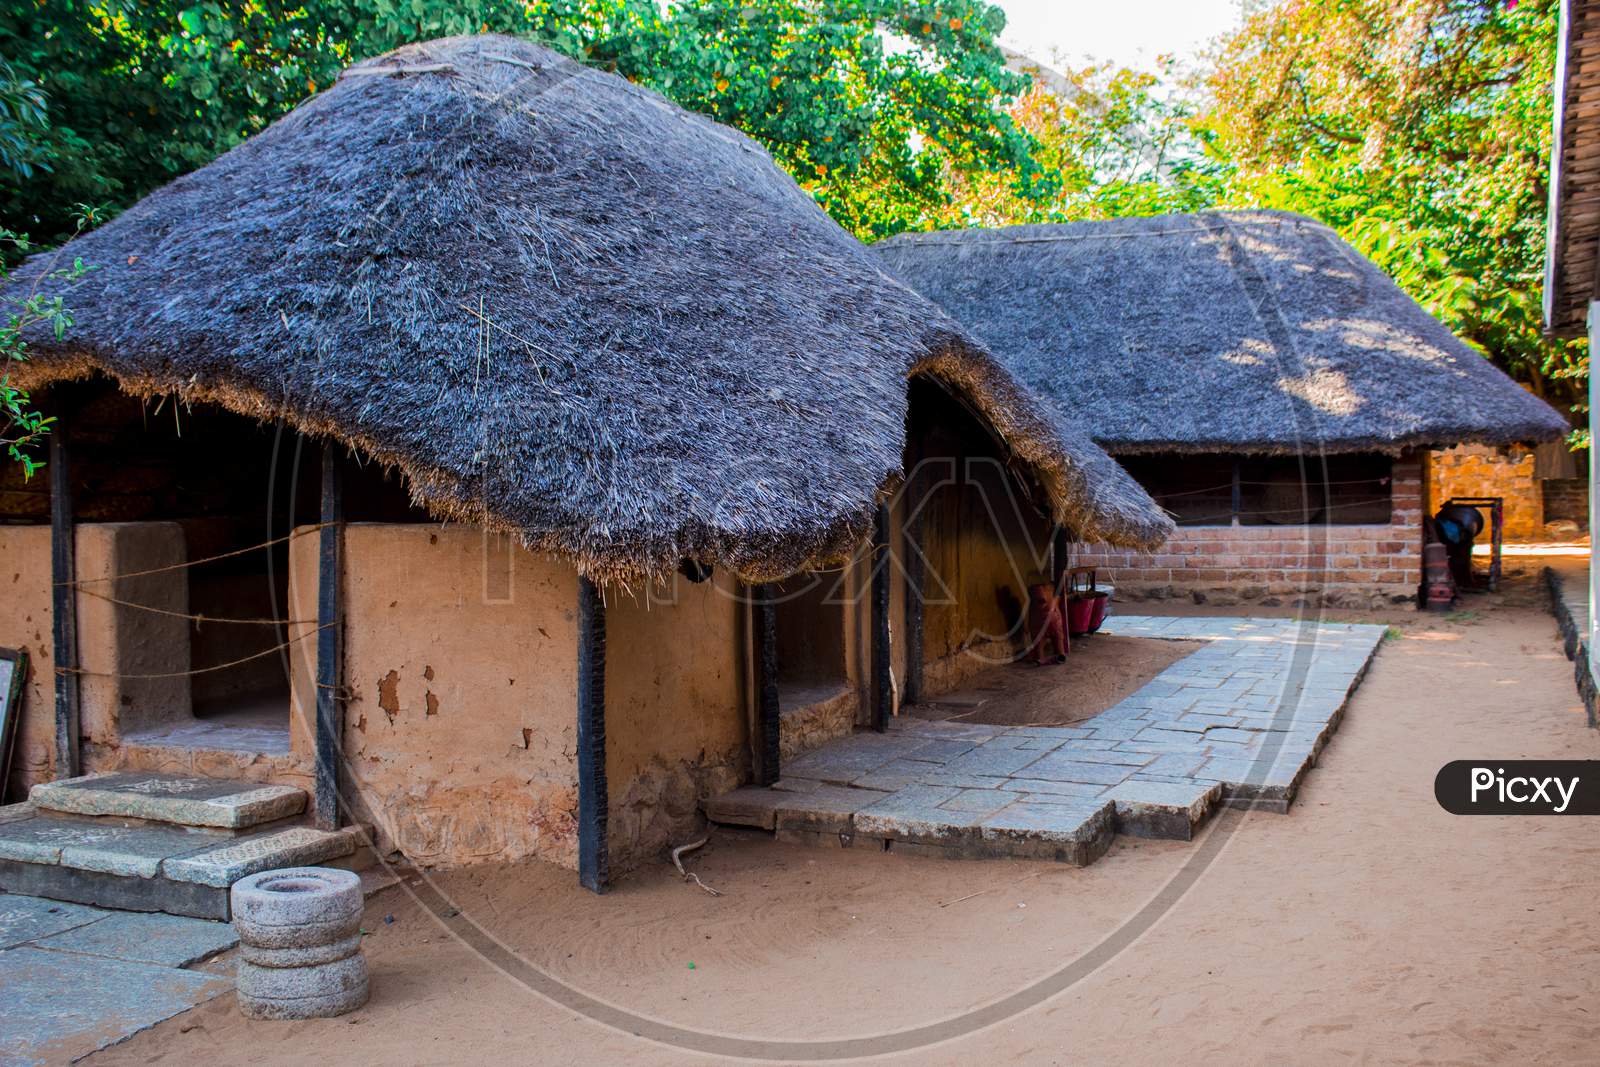 Thatched Huts in Indian Rural Villages